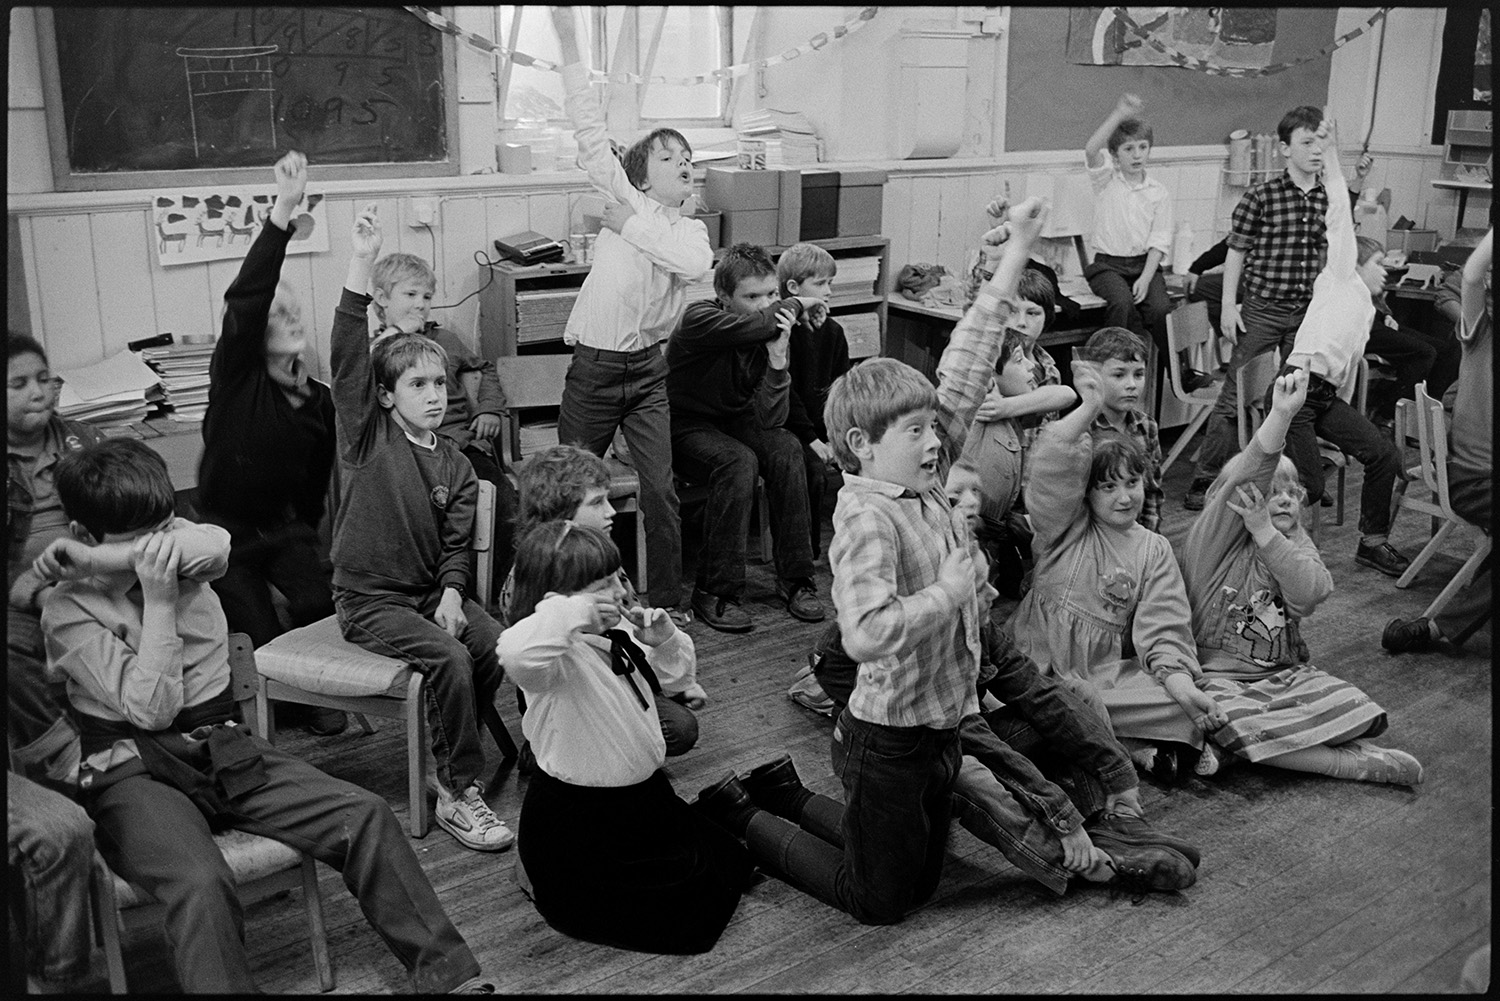 Christmas end of term party in primary school, games, teacher talking to pupils.
[A Christmas end of term party at Chulmleigh Primary School. The children who are sitting on chairs or on the floor, most with their hands up, are playing a party game. There are paper chains alongside blackboards, noticeboards and shelves of books in the classroom.]